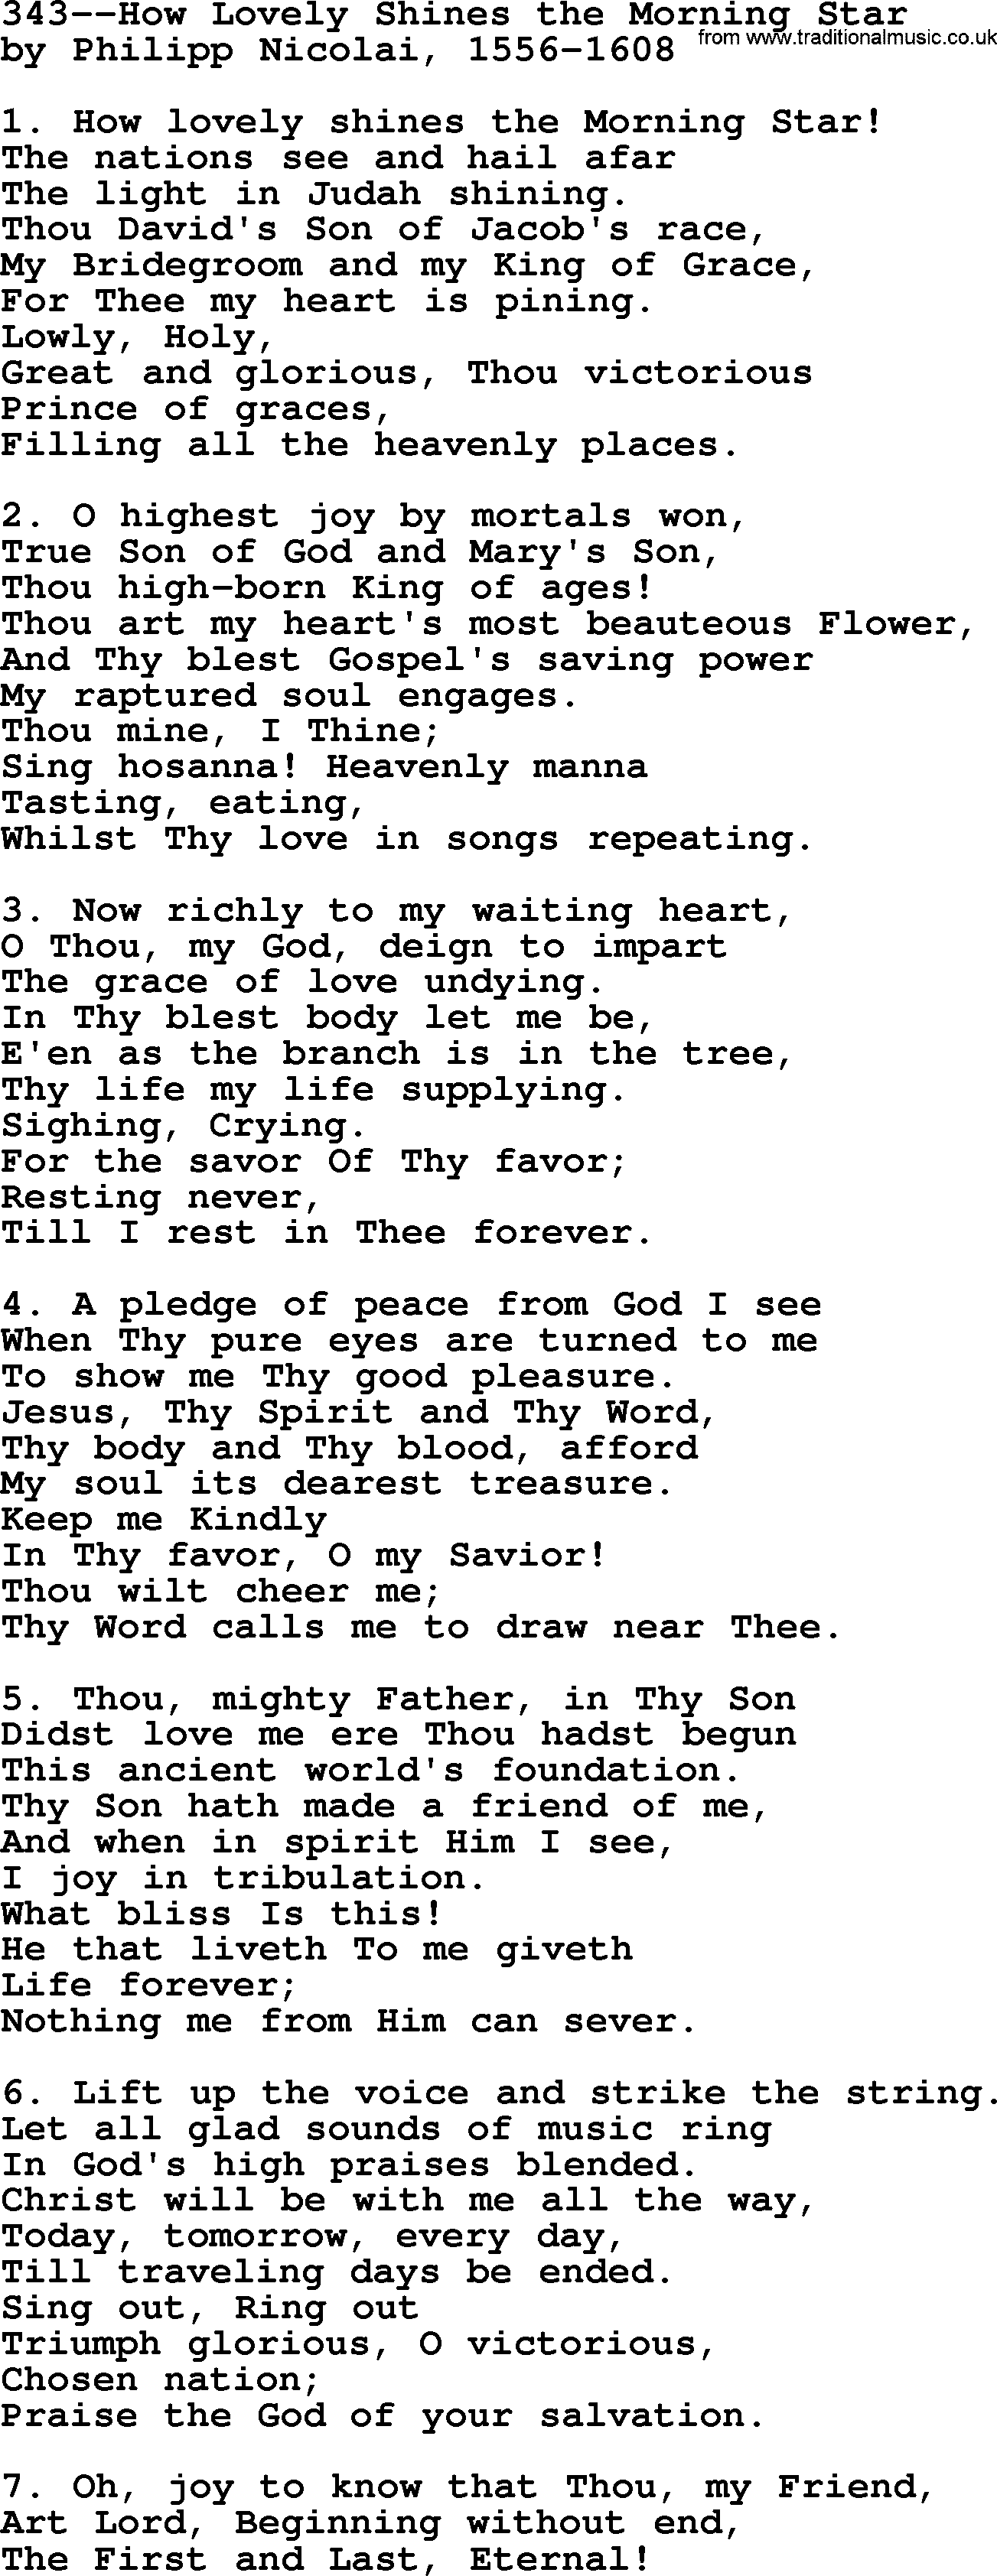 Lutheran Hymn: 343--How Lovely Shines the Morning Star.txt lyrics with PDF